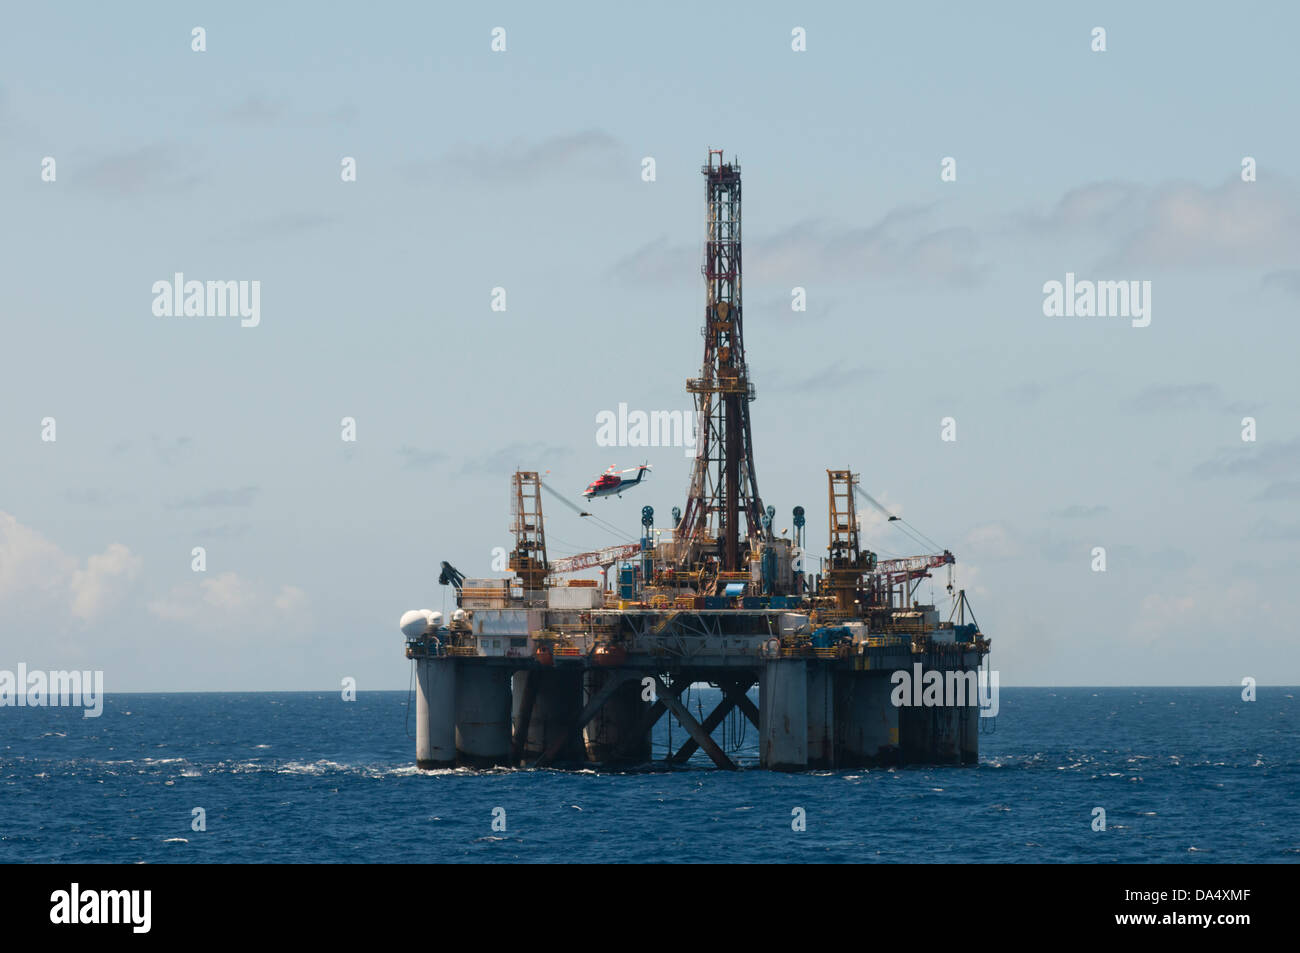 Helicopter departing from Falcon 100 oil drilling rig offshore Rio de Janeiro, Brazil, working for Petrobras oil company Stock Photo